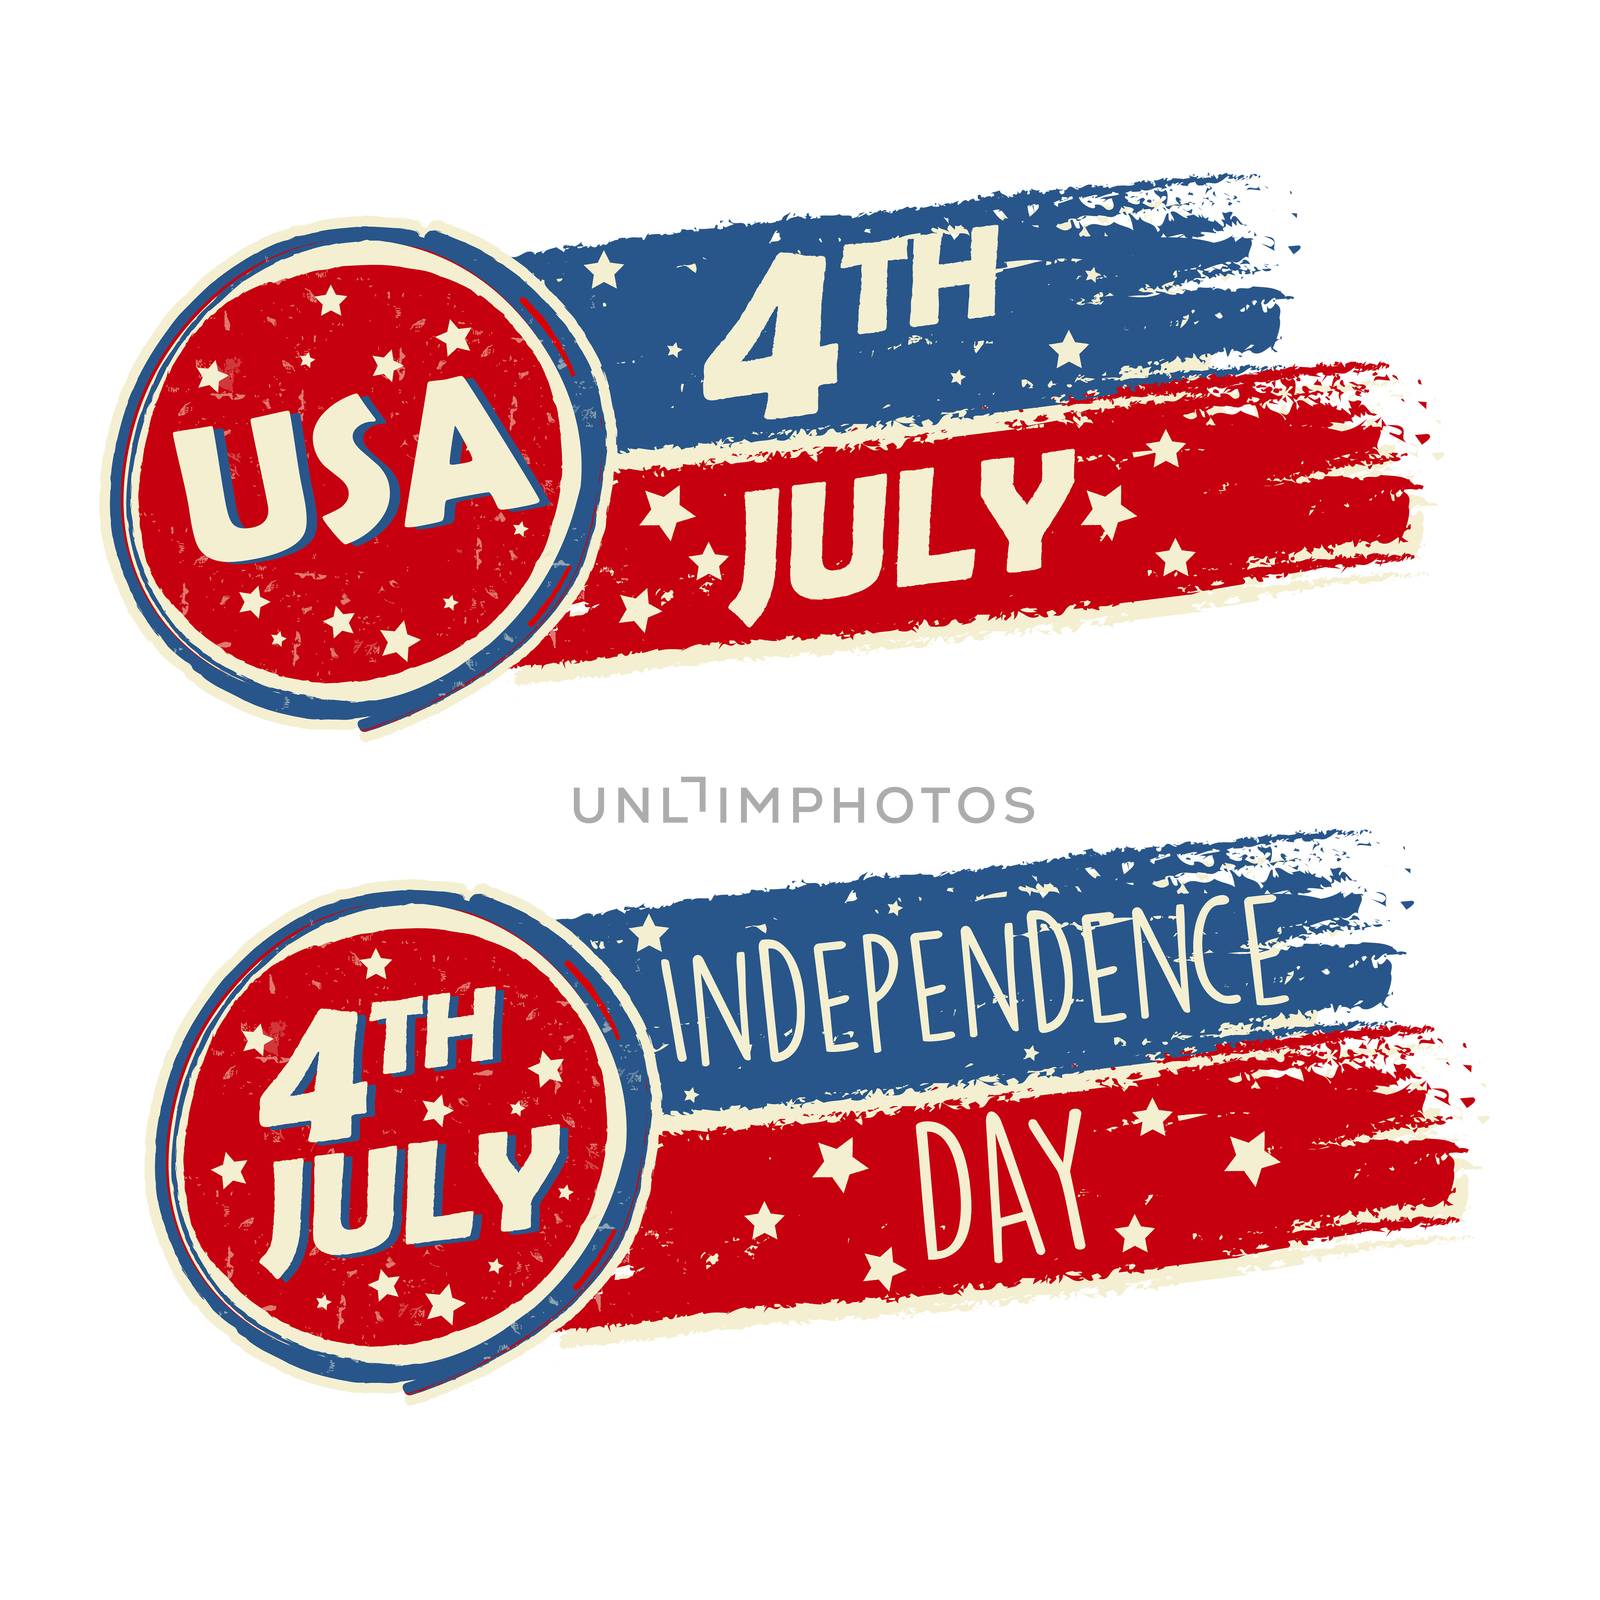 USA Independence Day and 4th of July with stars in drawing banners - American holiday concept